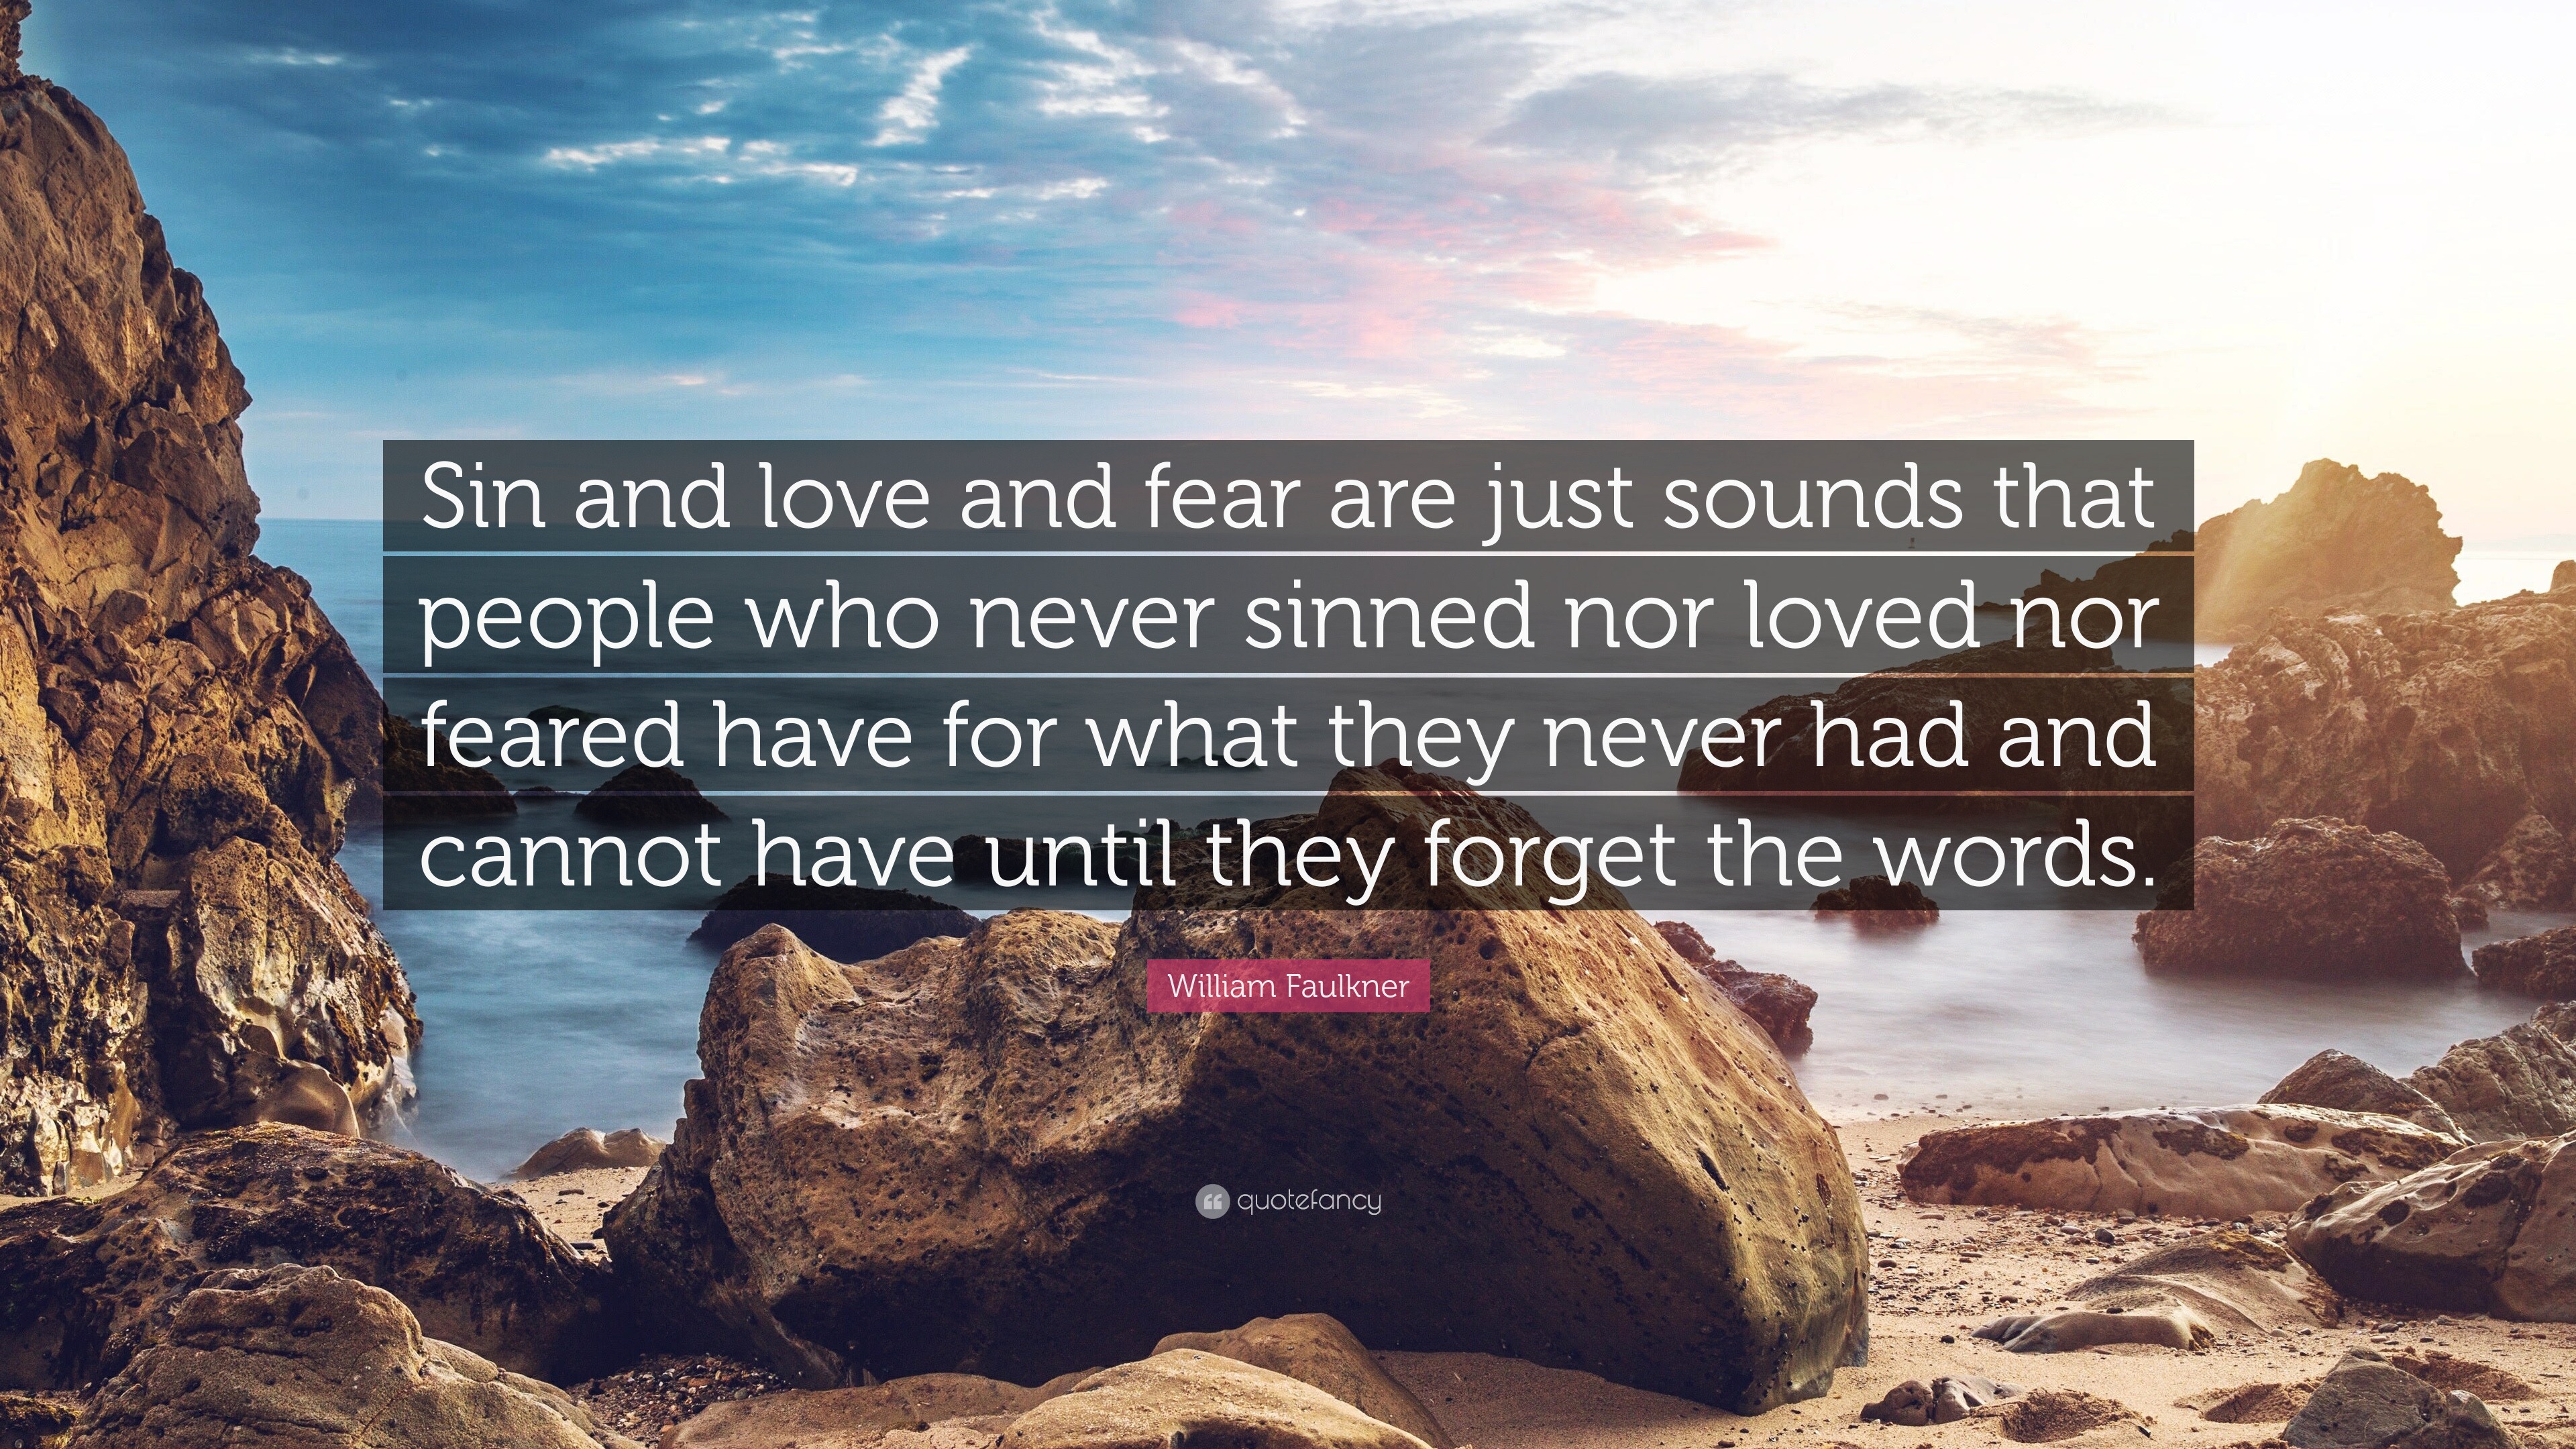 William Faulkner Quote Sin And Love And Fear Are Just Sounds That People Who Never Sinned Nor Loved Nor Feared Have For What They Never Had And 7 Wallpapers Quotefancy